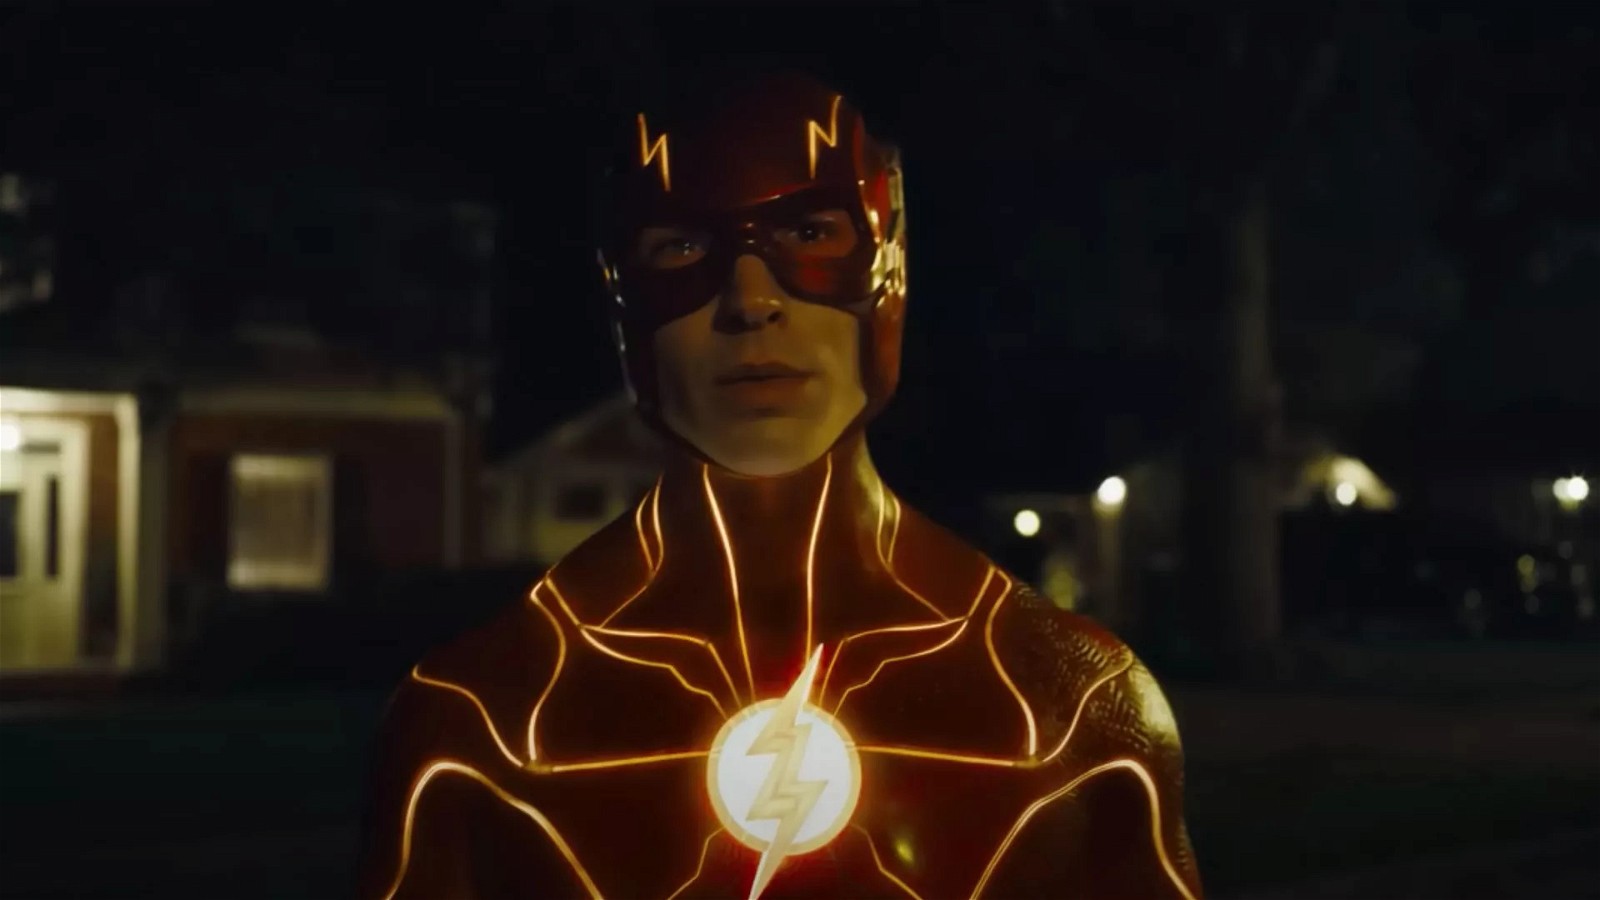 The Flash initiates the Flashpoint arc